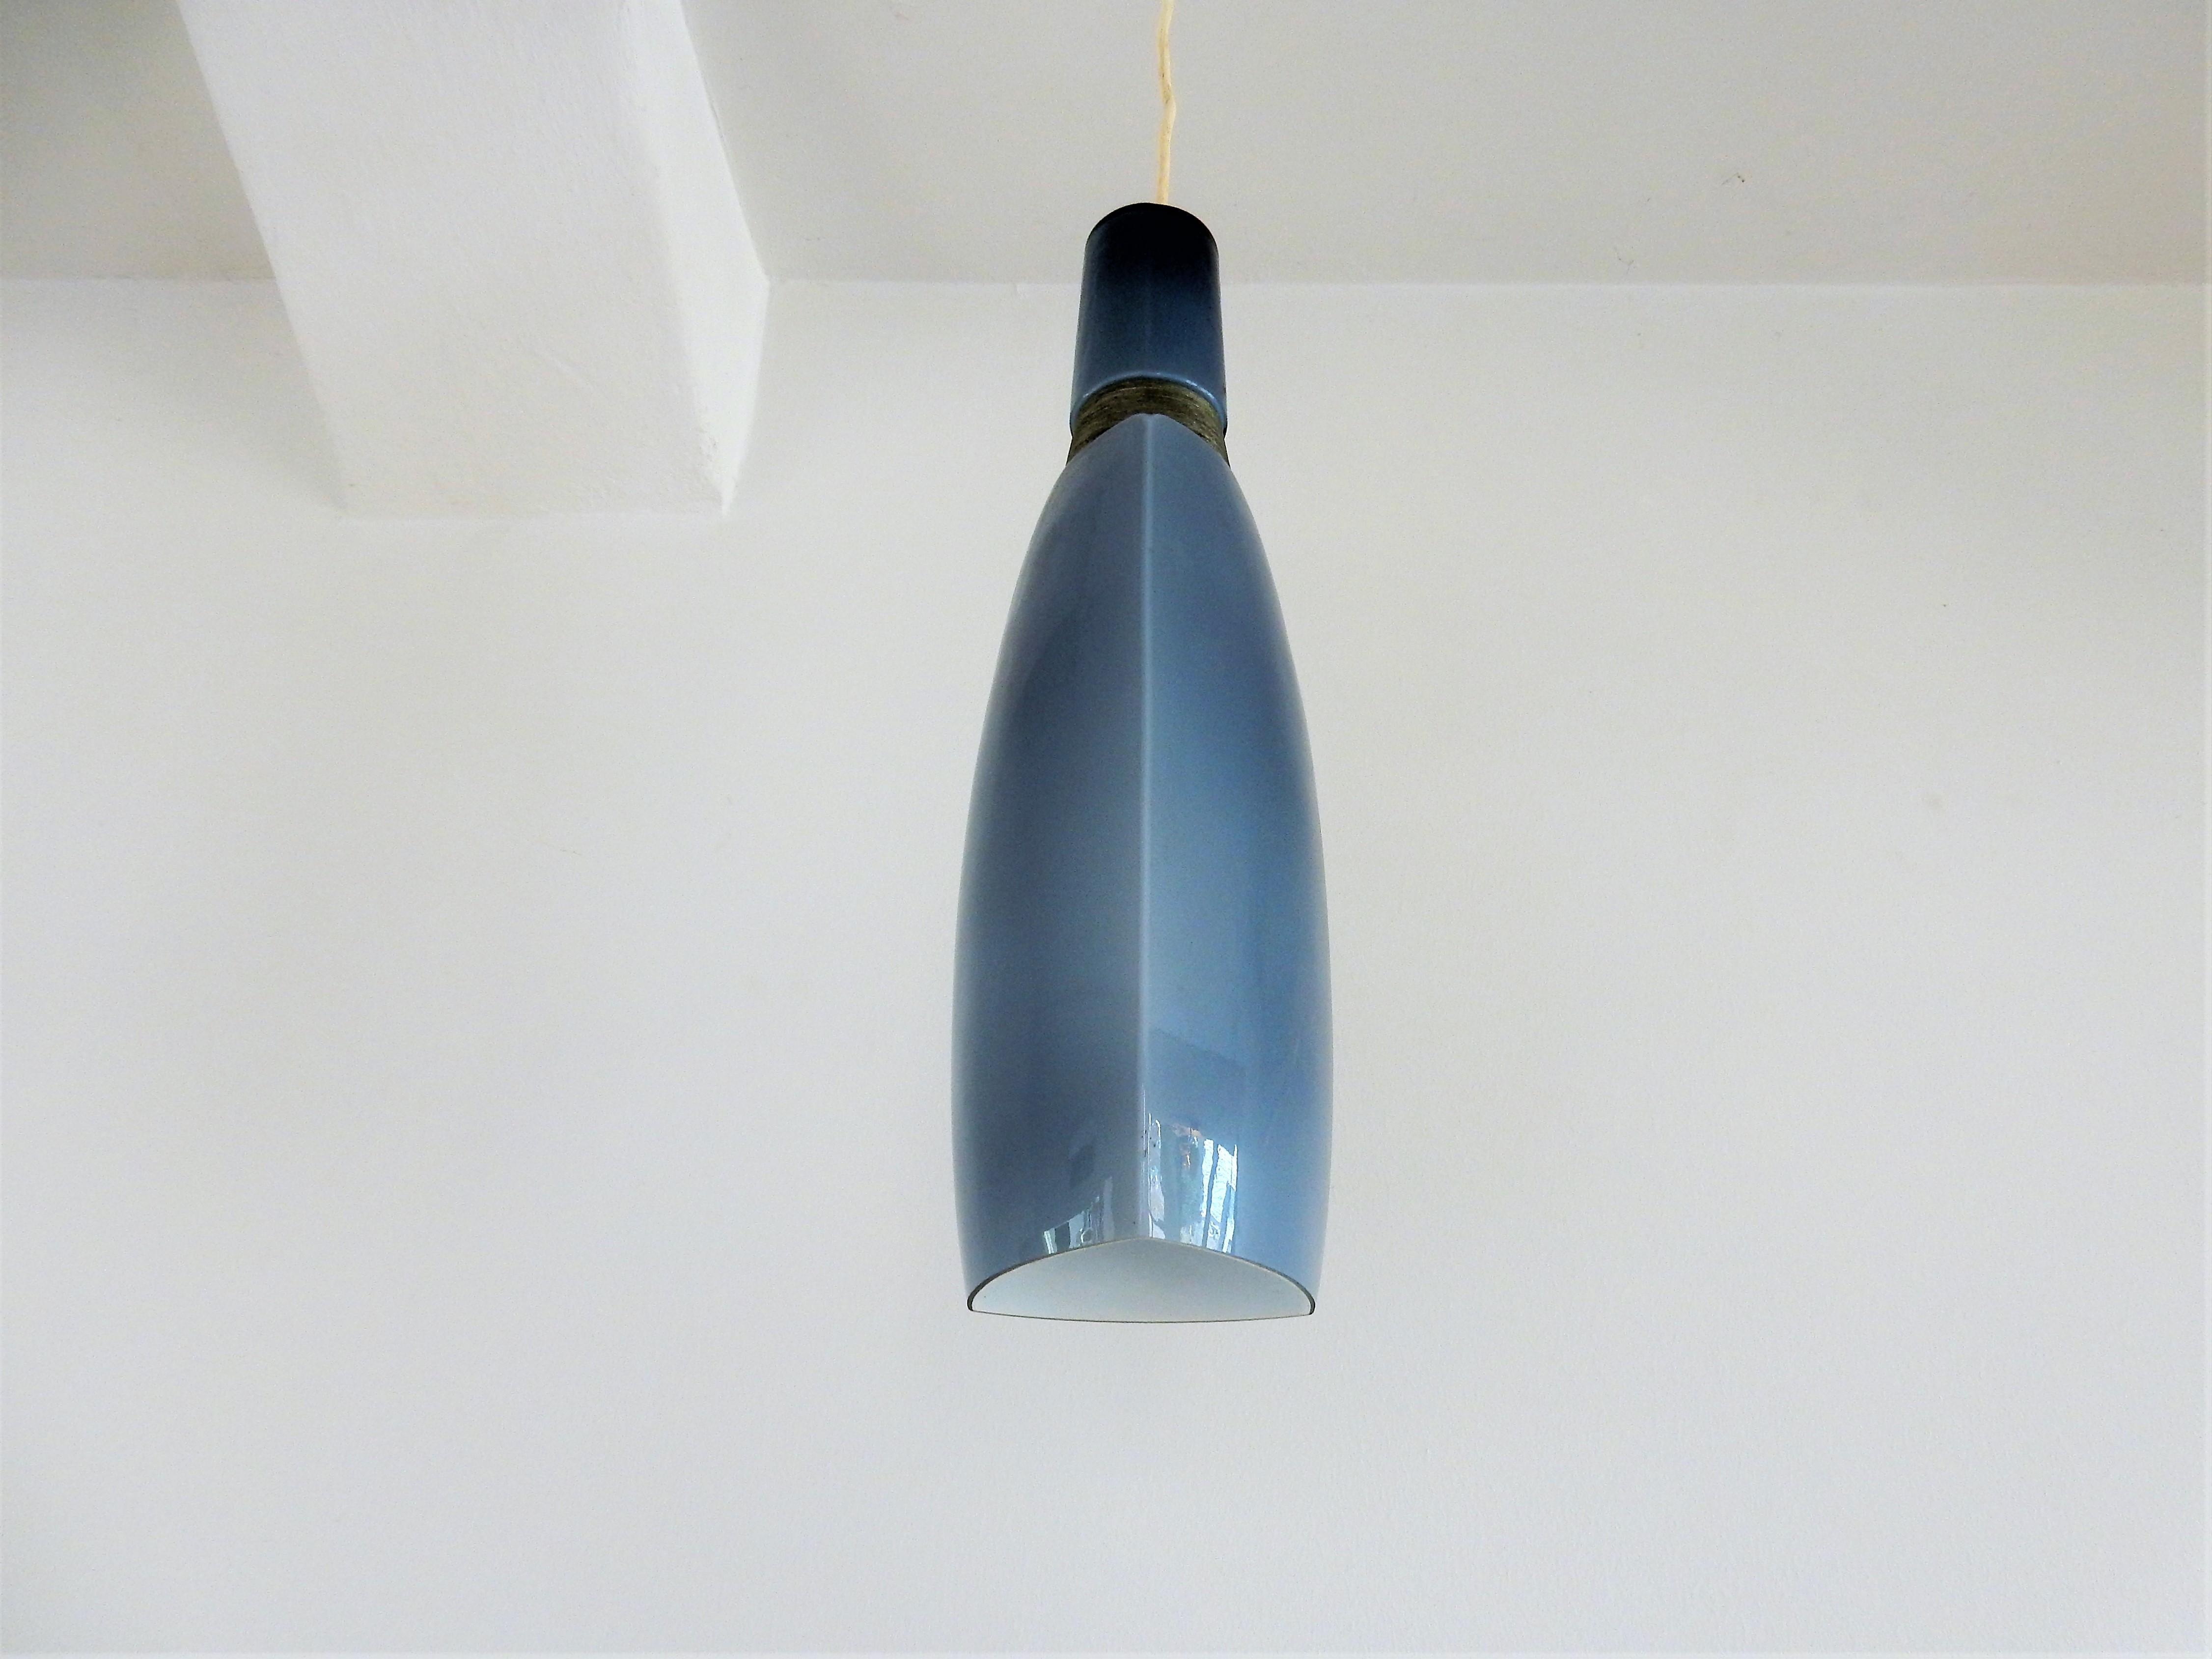 This is a very nice vintage blue glass pendant lamp with a metal wire detailing. The opaline inside gives a beautiful soft light. This light is of Scandinavian origin and often attributed to Holmegaard.